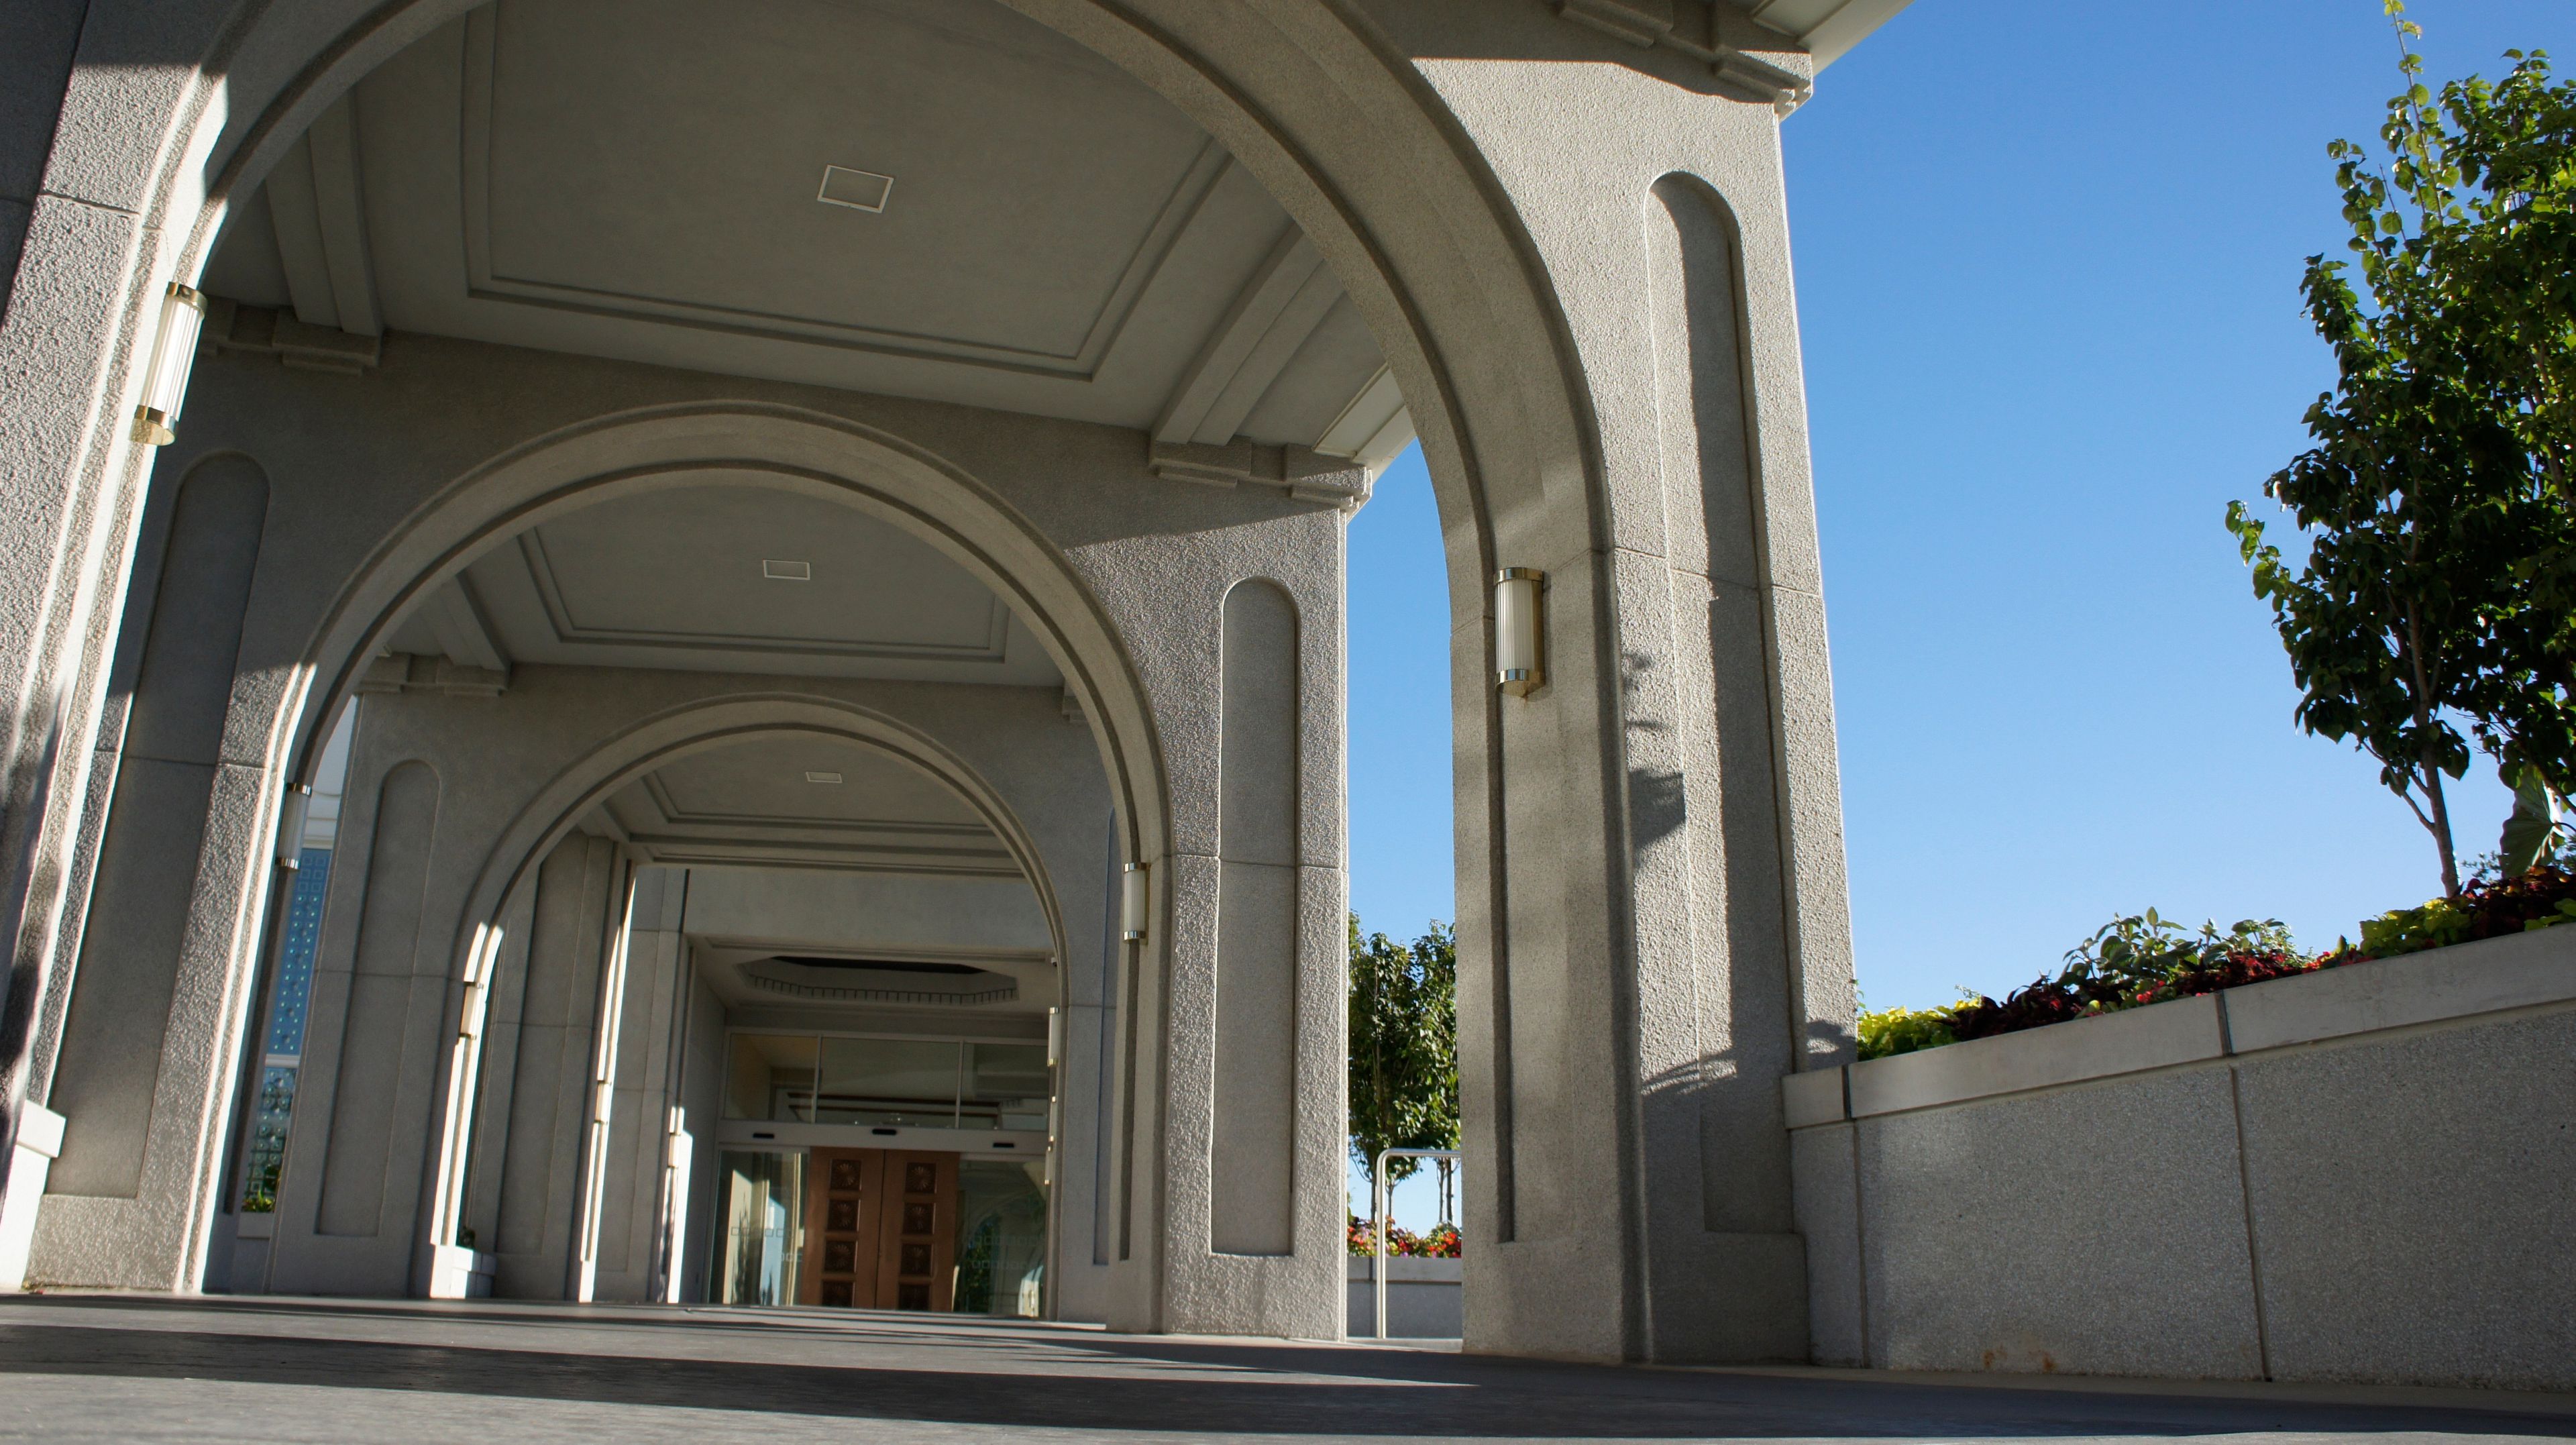 The Mount Timpanogos Utah Temple entrance, including the exterior of the temple.